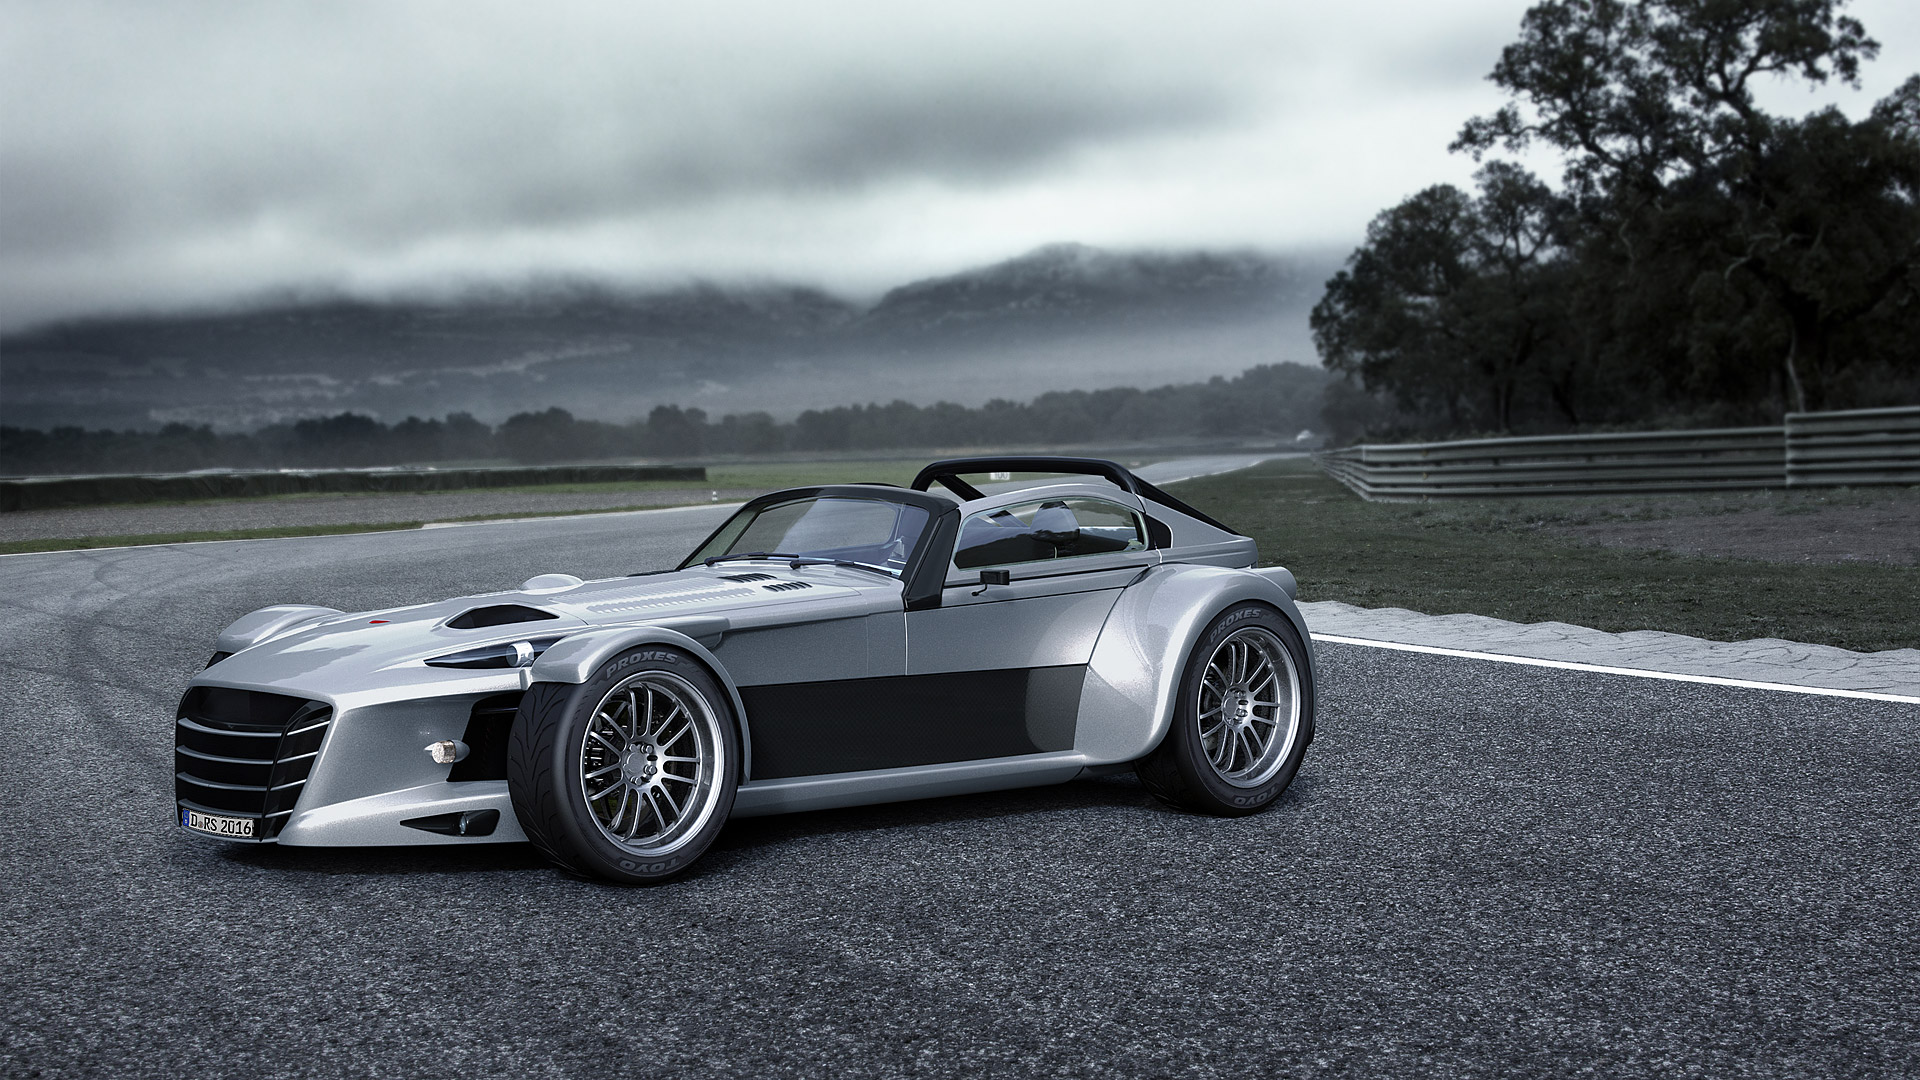  2017 Donkervoort D8 GTO-RS Wallpaper.